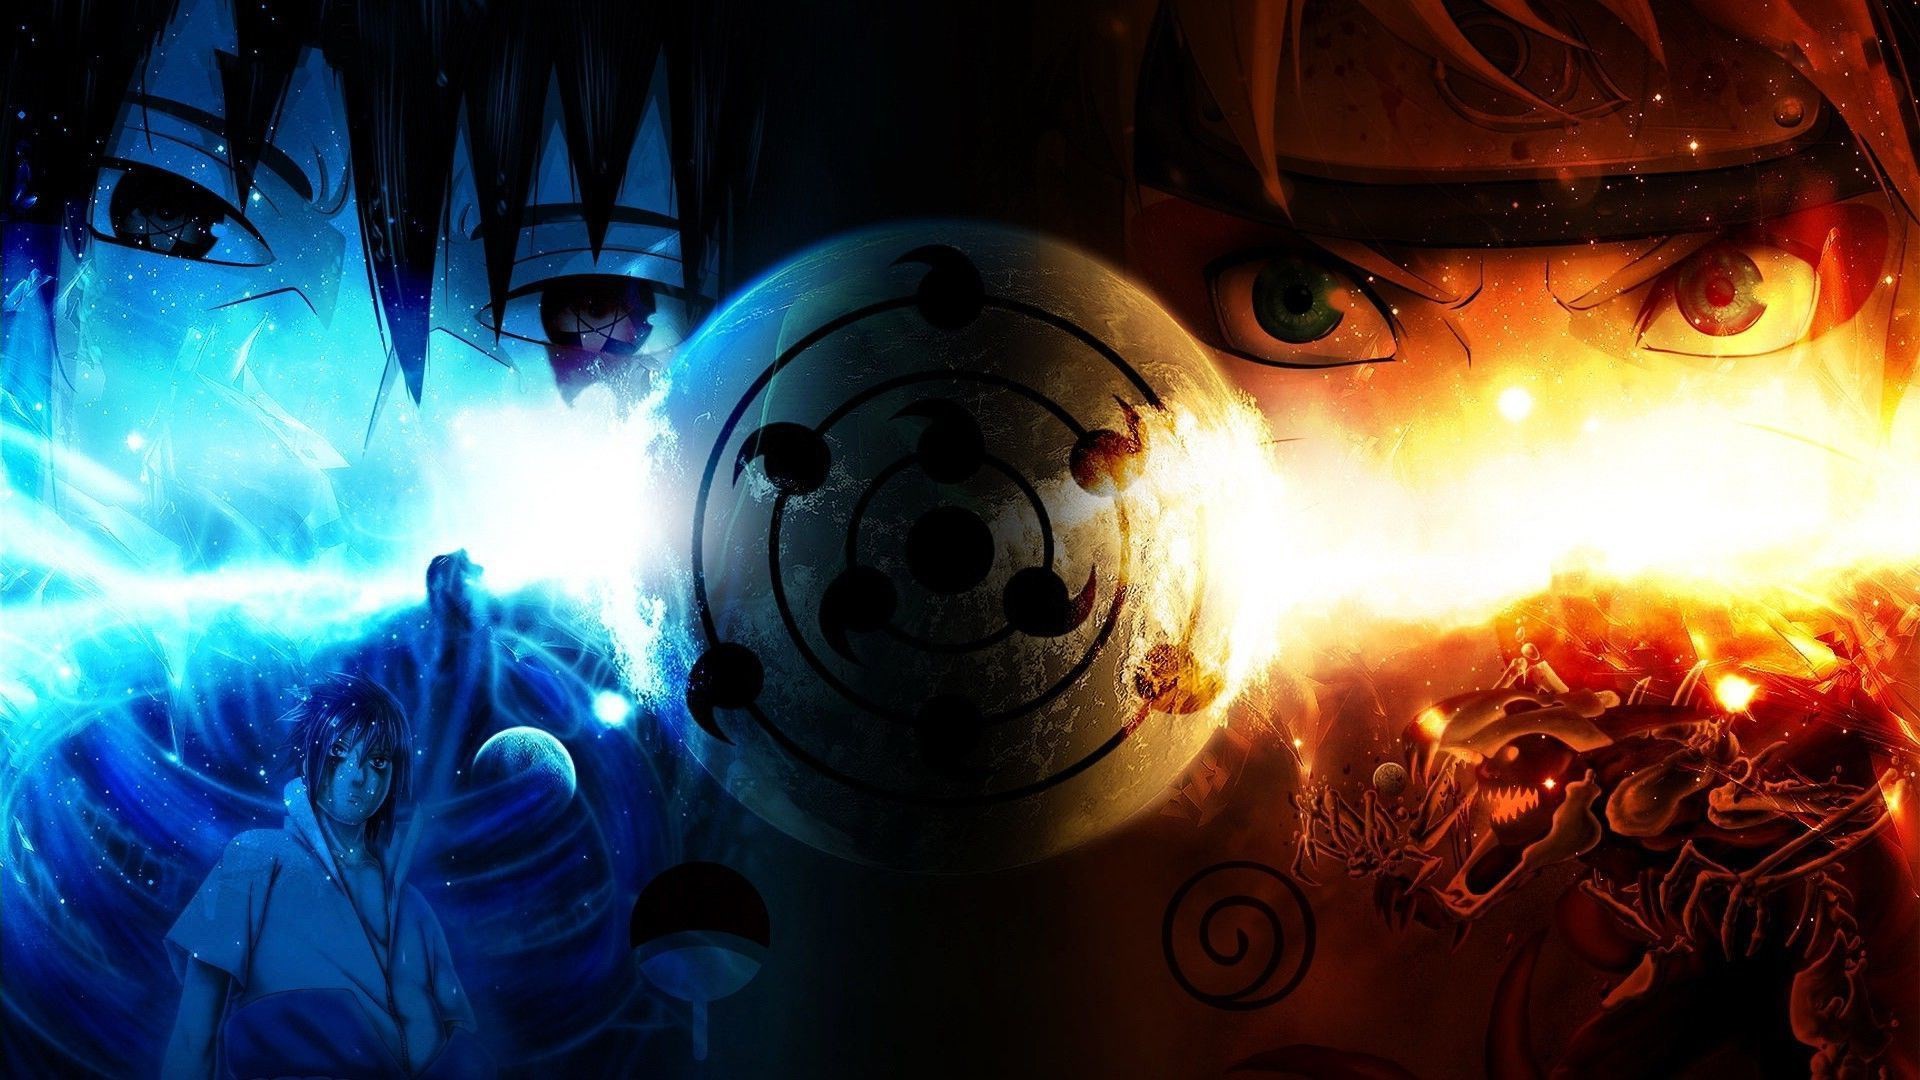 1920x1080 naruto fire and ice hd anime wallpaper 